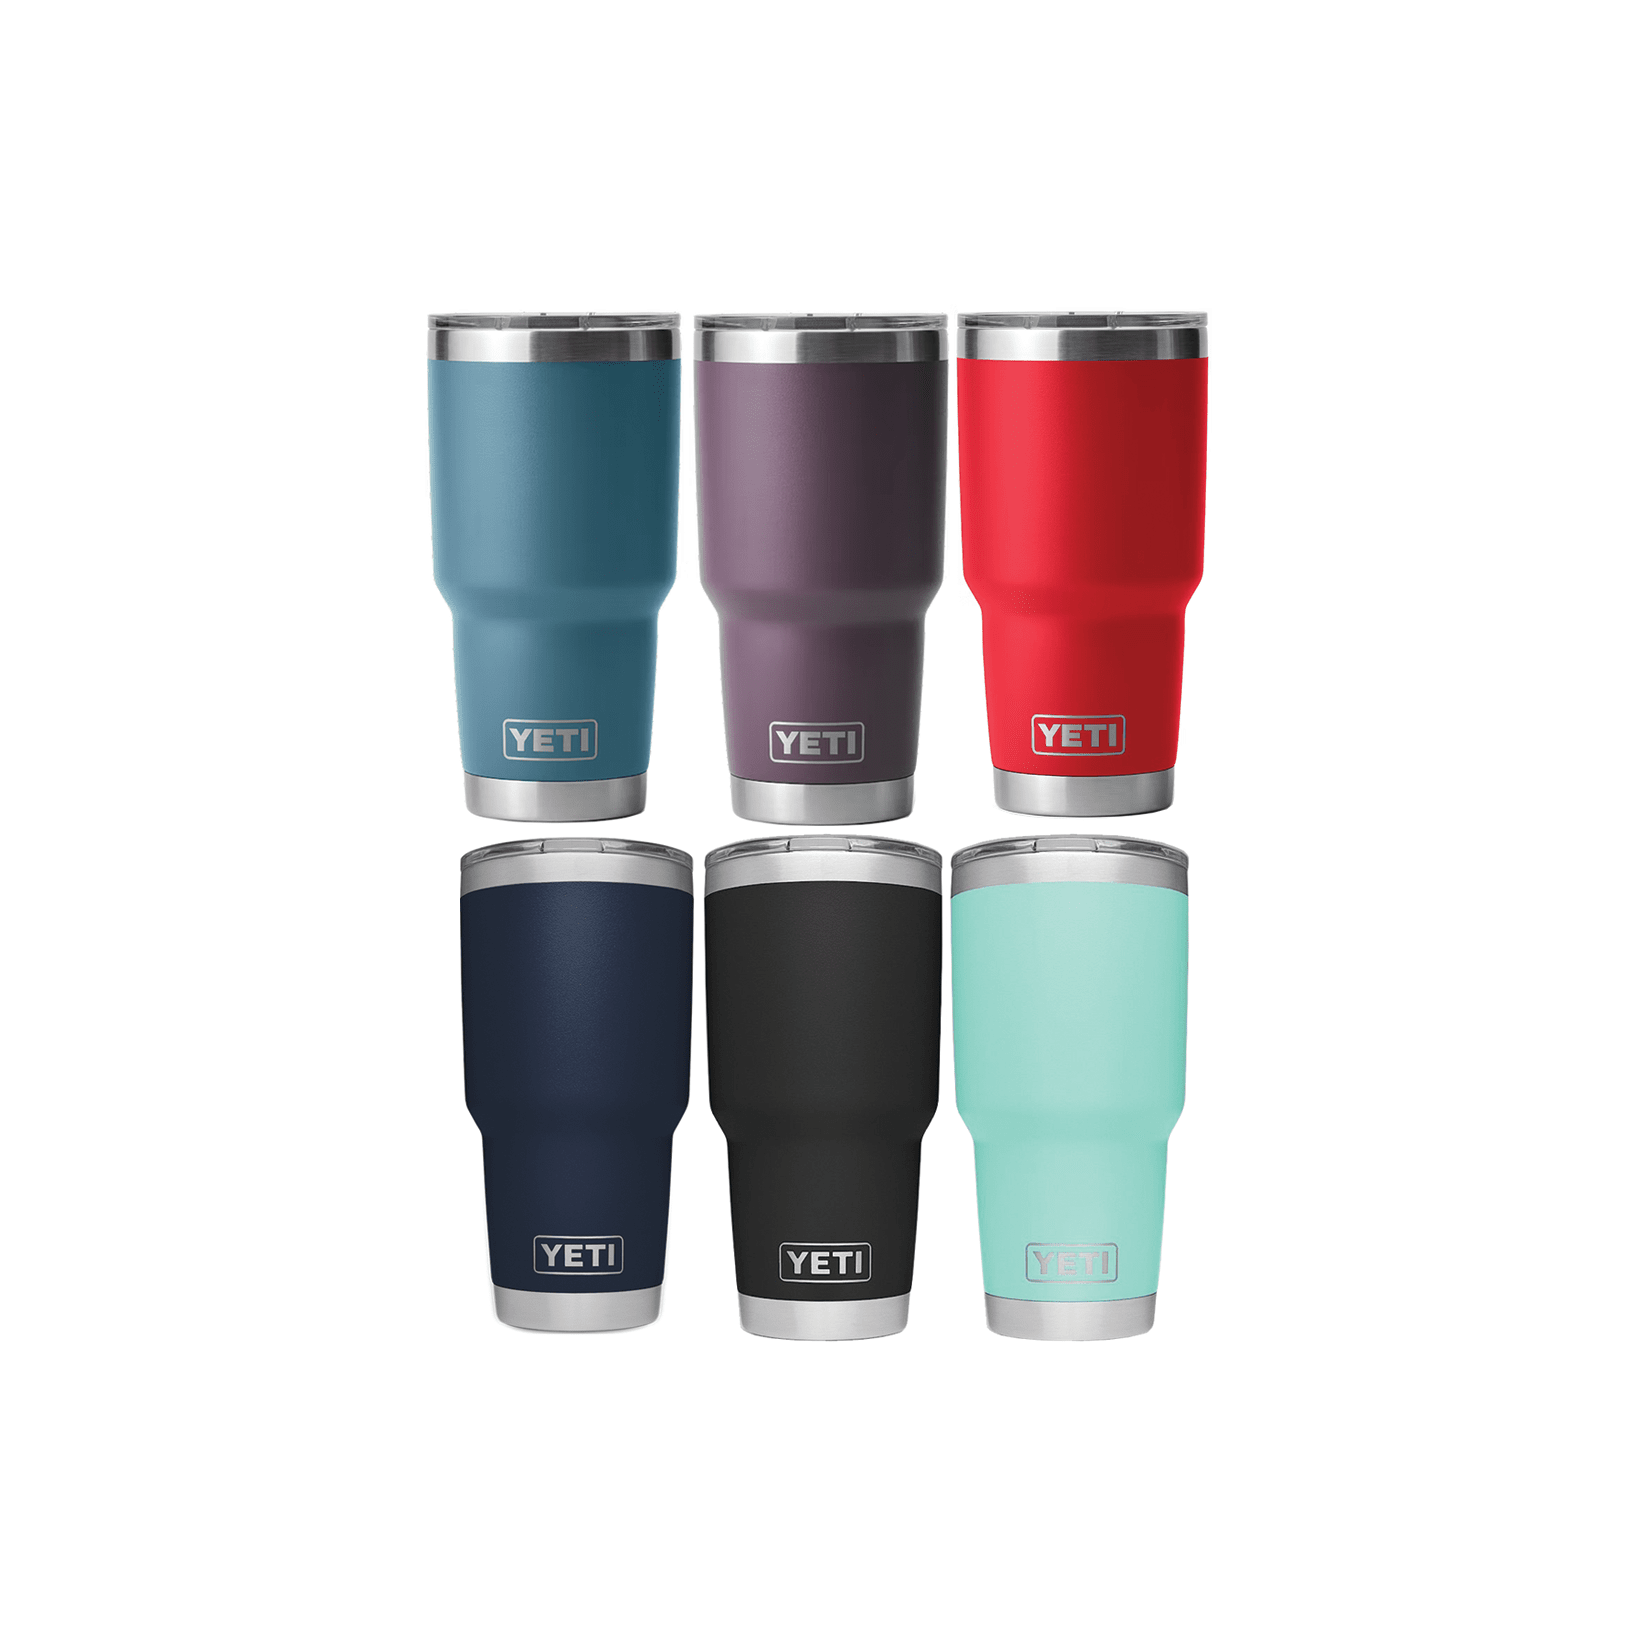 https://image.fisheriessupply.com/c_lpad,dpr_3.0,w_550,h_550,d_imageComingSoon-tiff/f_auto,q_auto/v1/static-images/yeti-coolers-rambler-insulated-tumblers-4-colors-group